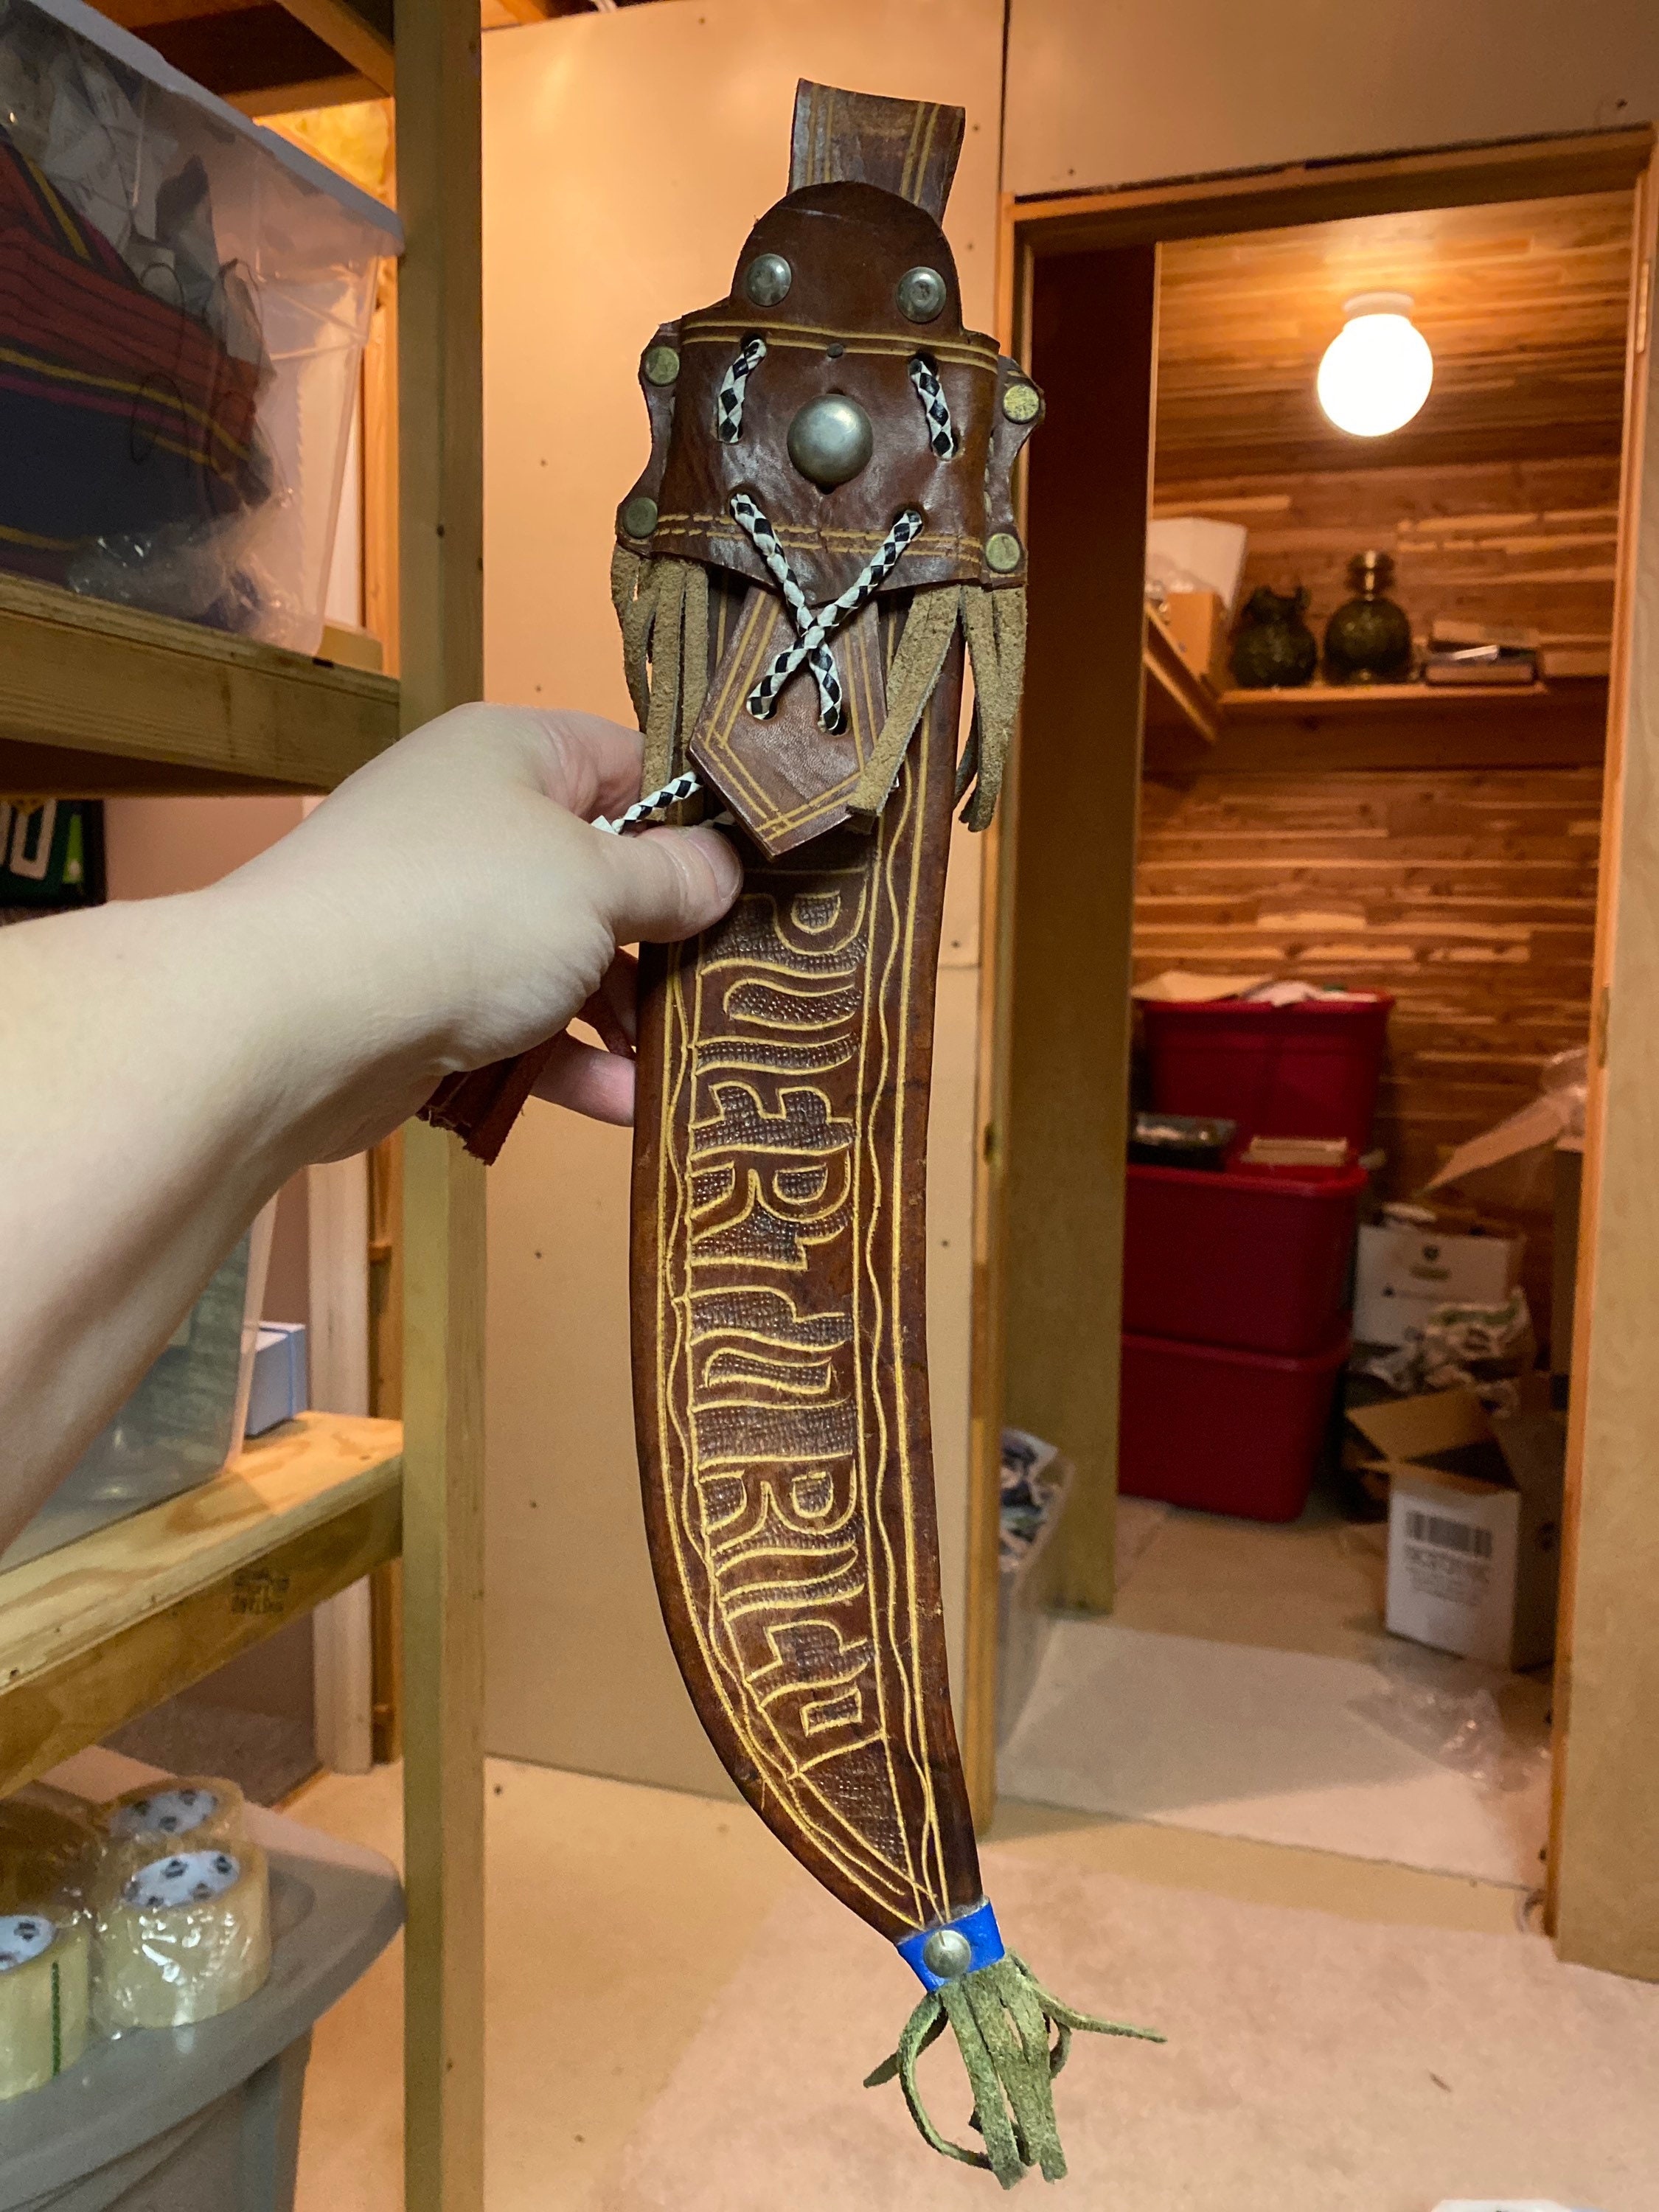 Pictavia Leather - A nice knife deserves a nice sheath. We don't have any  complete Pictish knife finds, nor any leather sheath finds here in  Scotland. This makes it extremely difficult to